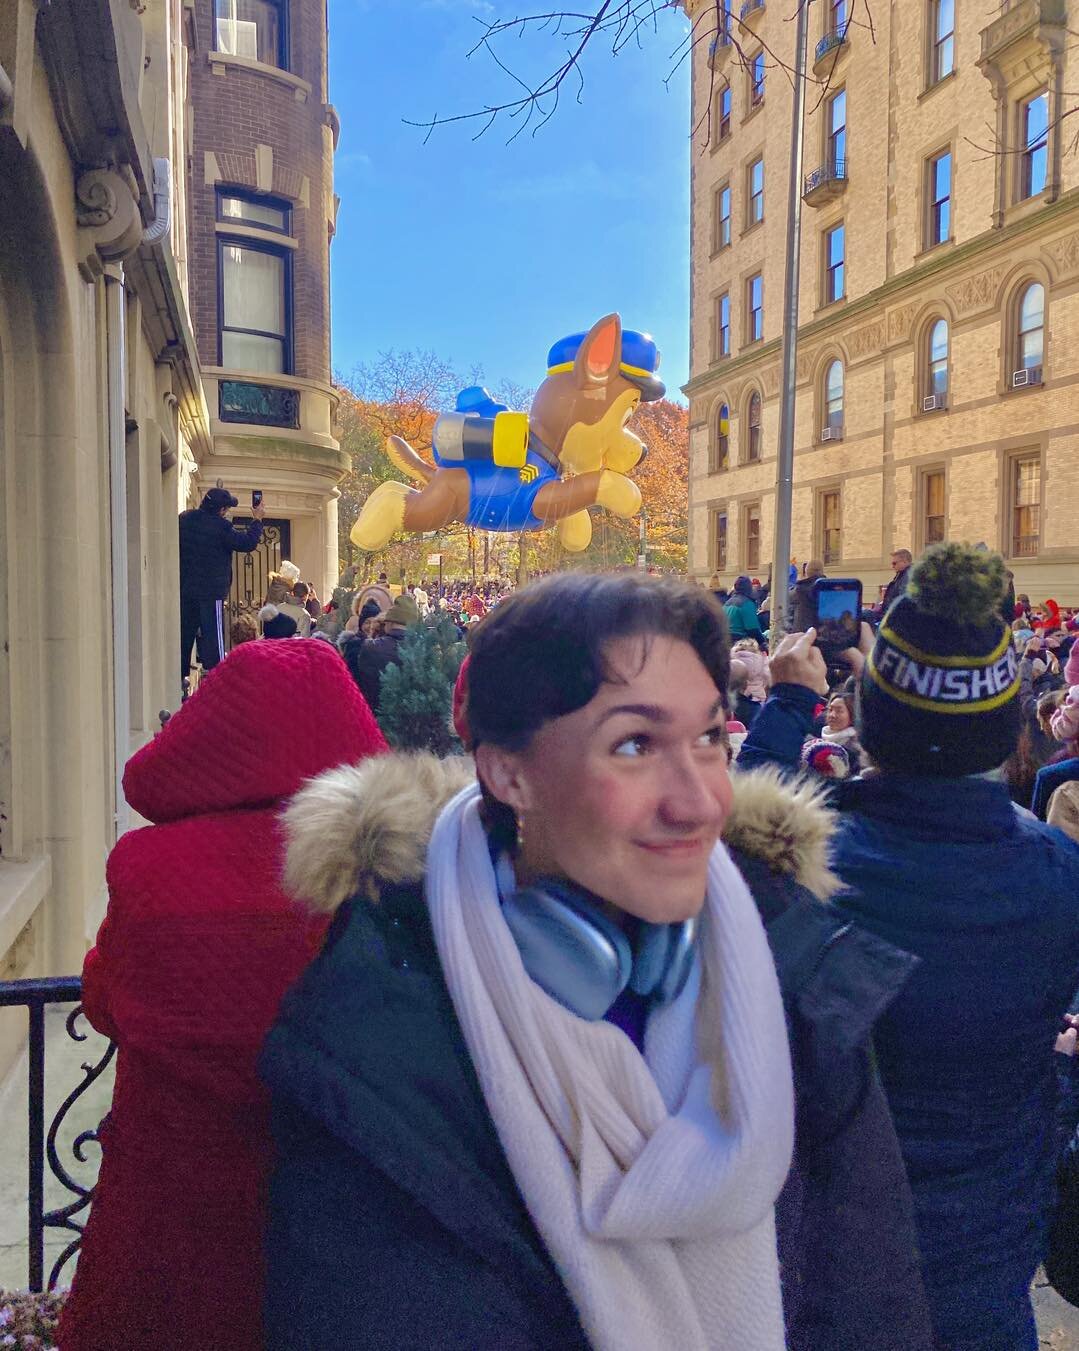 This message was approved by the Paw Patrol 
🐕🚨🐾
First Thanksgiving away from my family, but surrounded by the insane tourist crowds of the Macys Thanksgiving Day Parade. An insane euphoric moment to experience my childhood holiday rituals with so